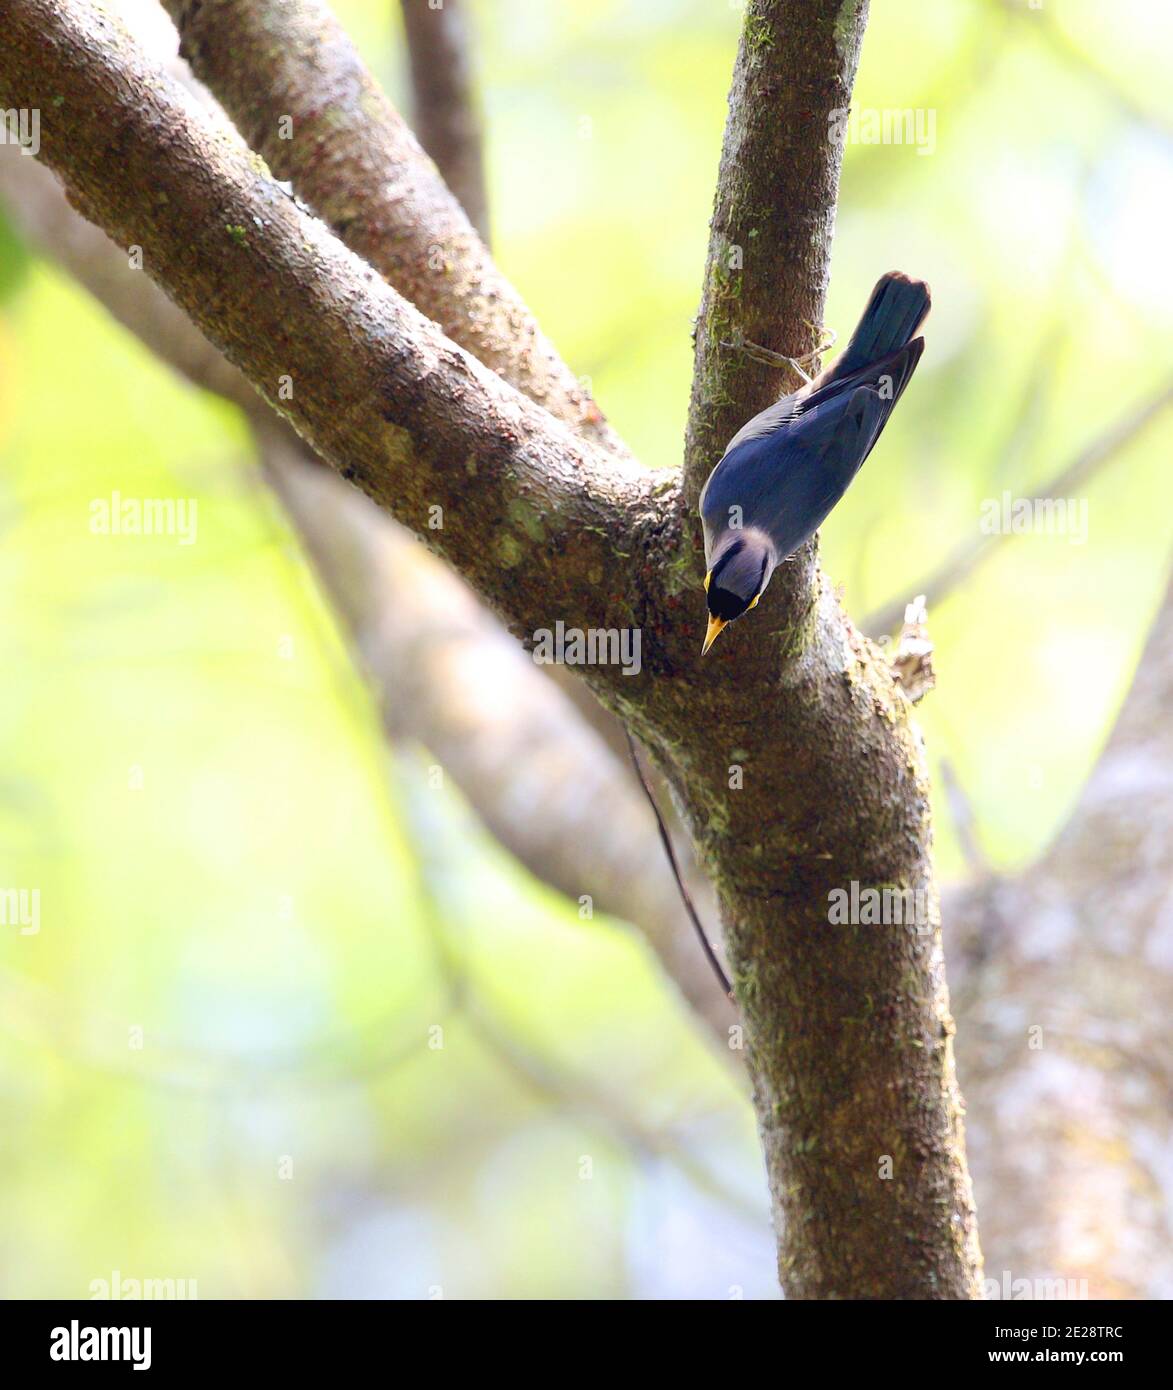 lilac nuthatch (Sitta solangiae), clinging on a branch in a tropical rain forest, Vietnam, Mang Den Stock Photo